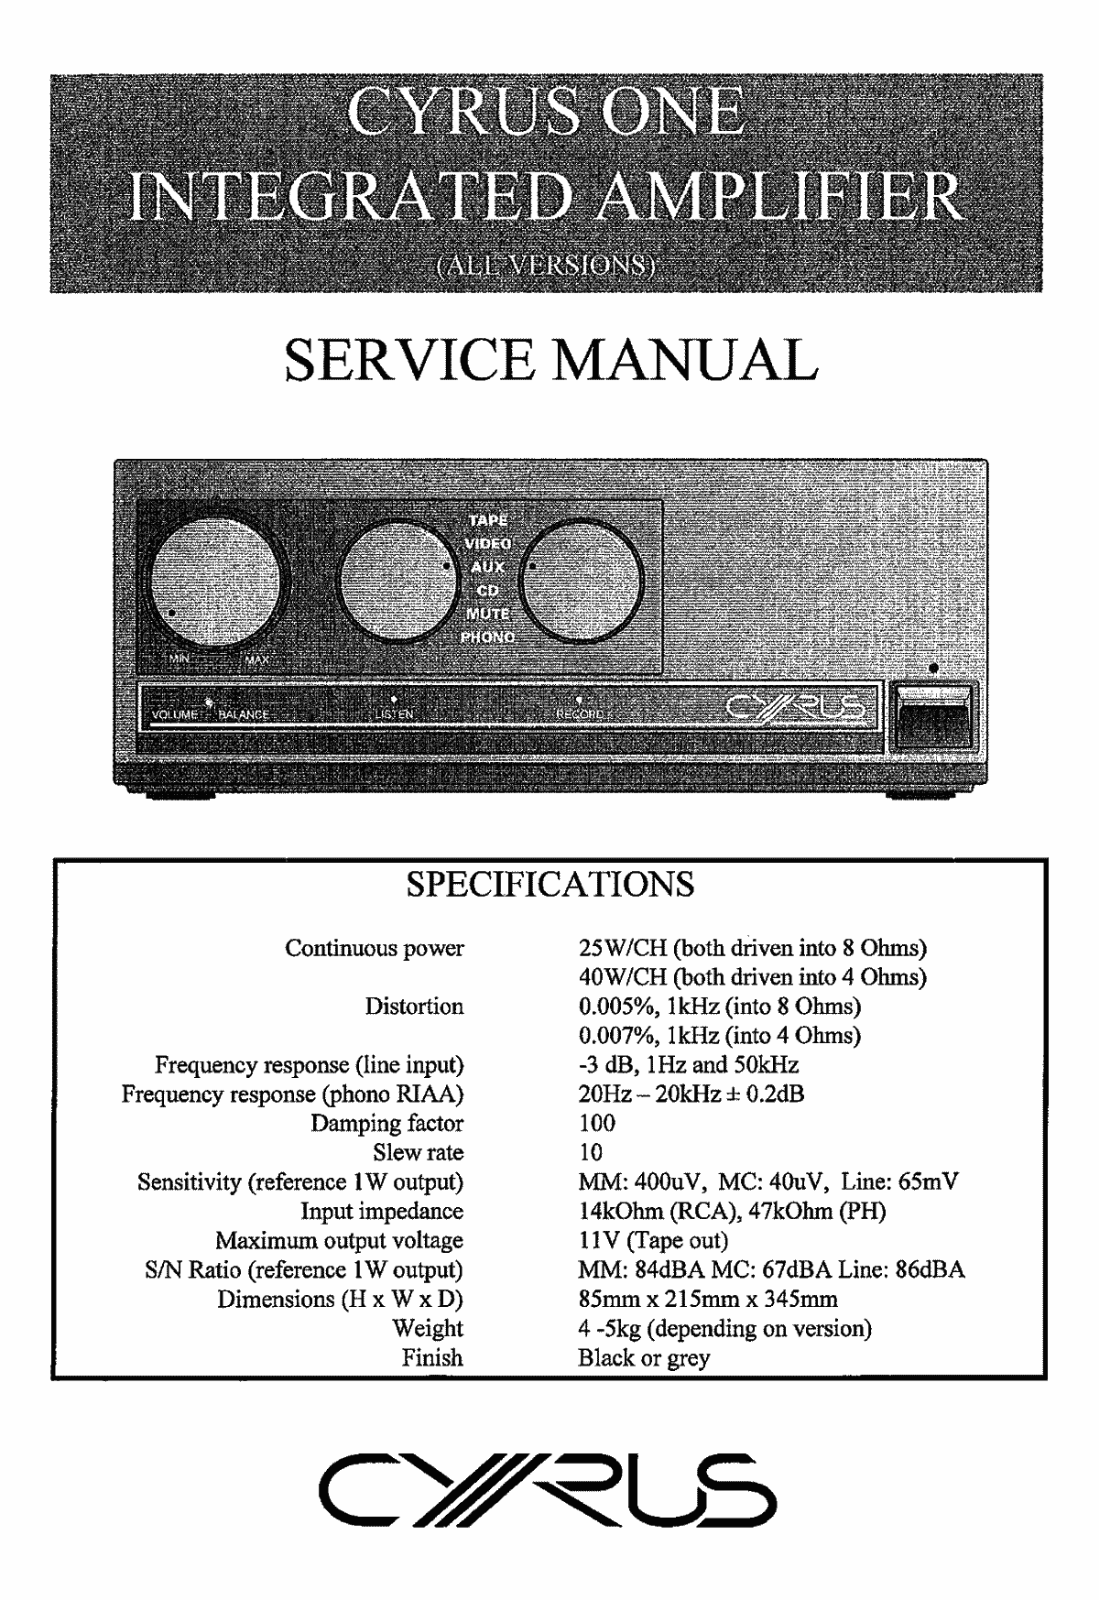 Mission Cyrus one Service manual